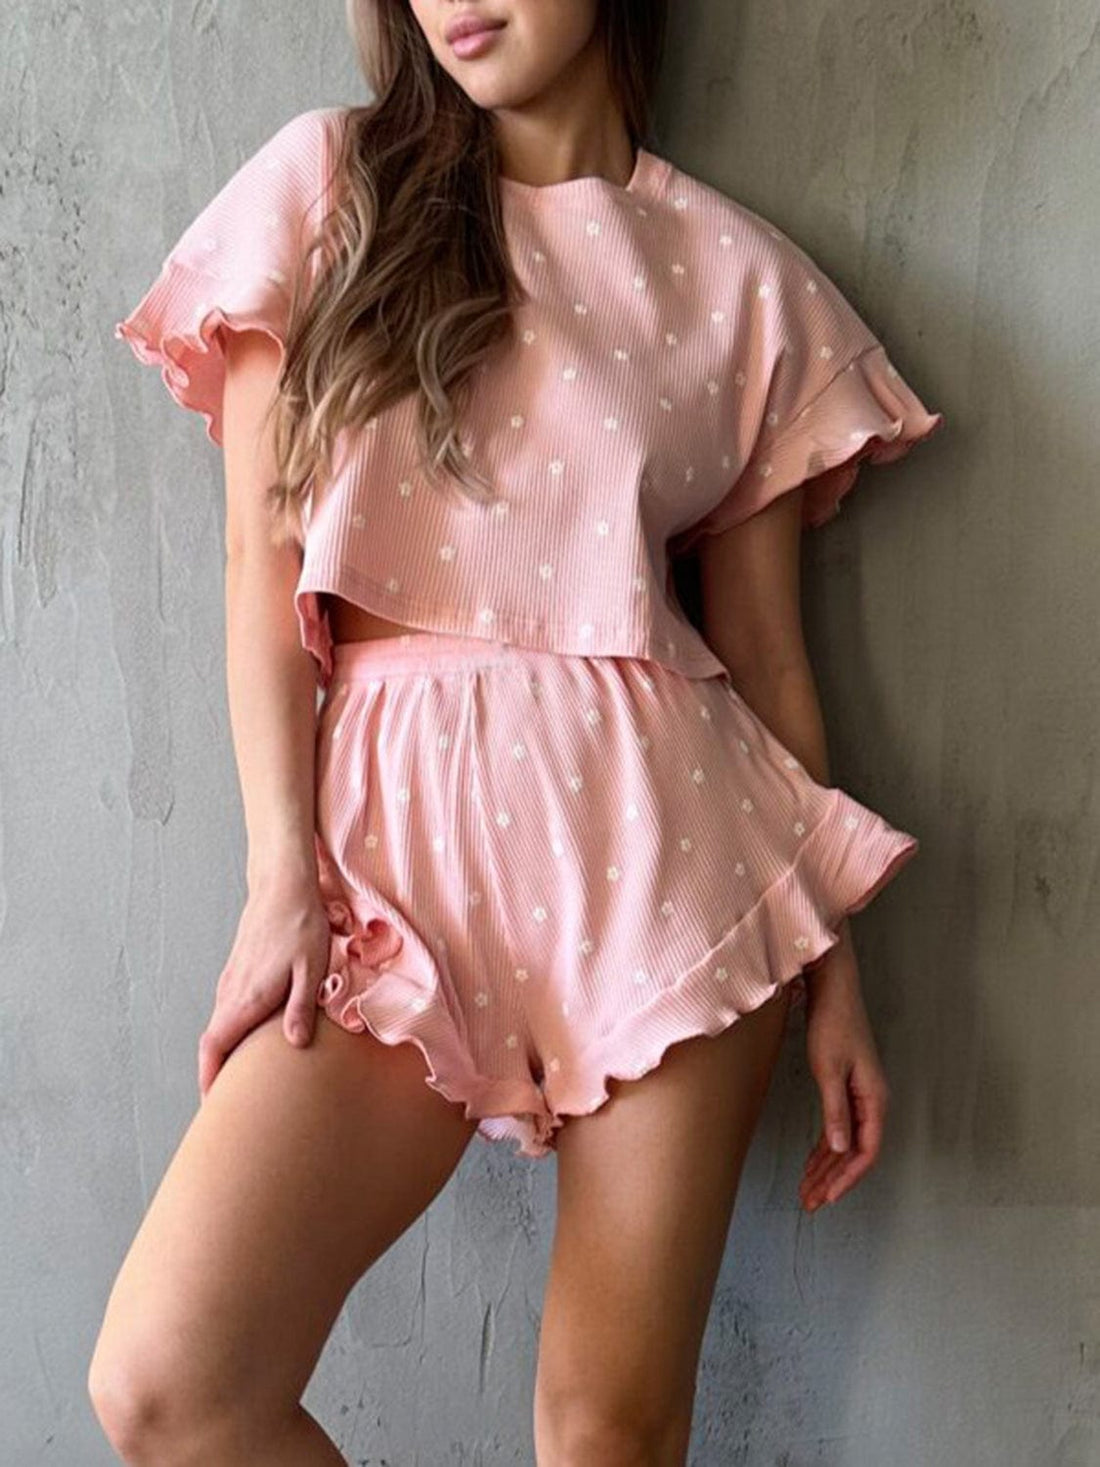 Round Neck Top and Shorts Set